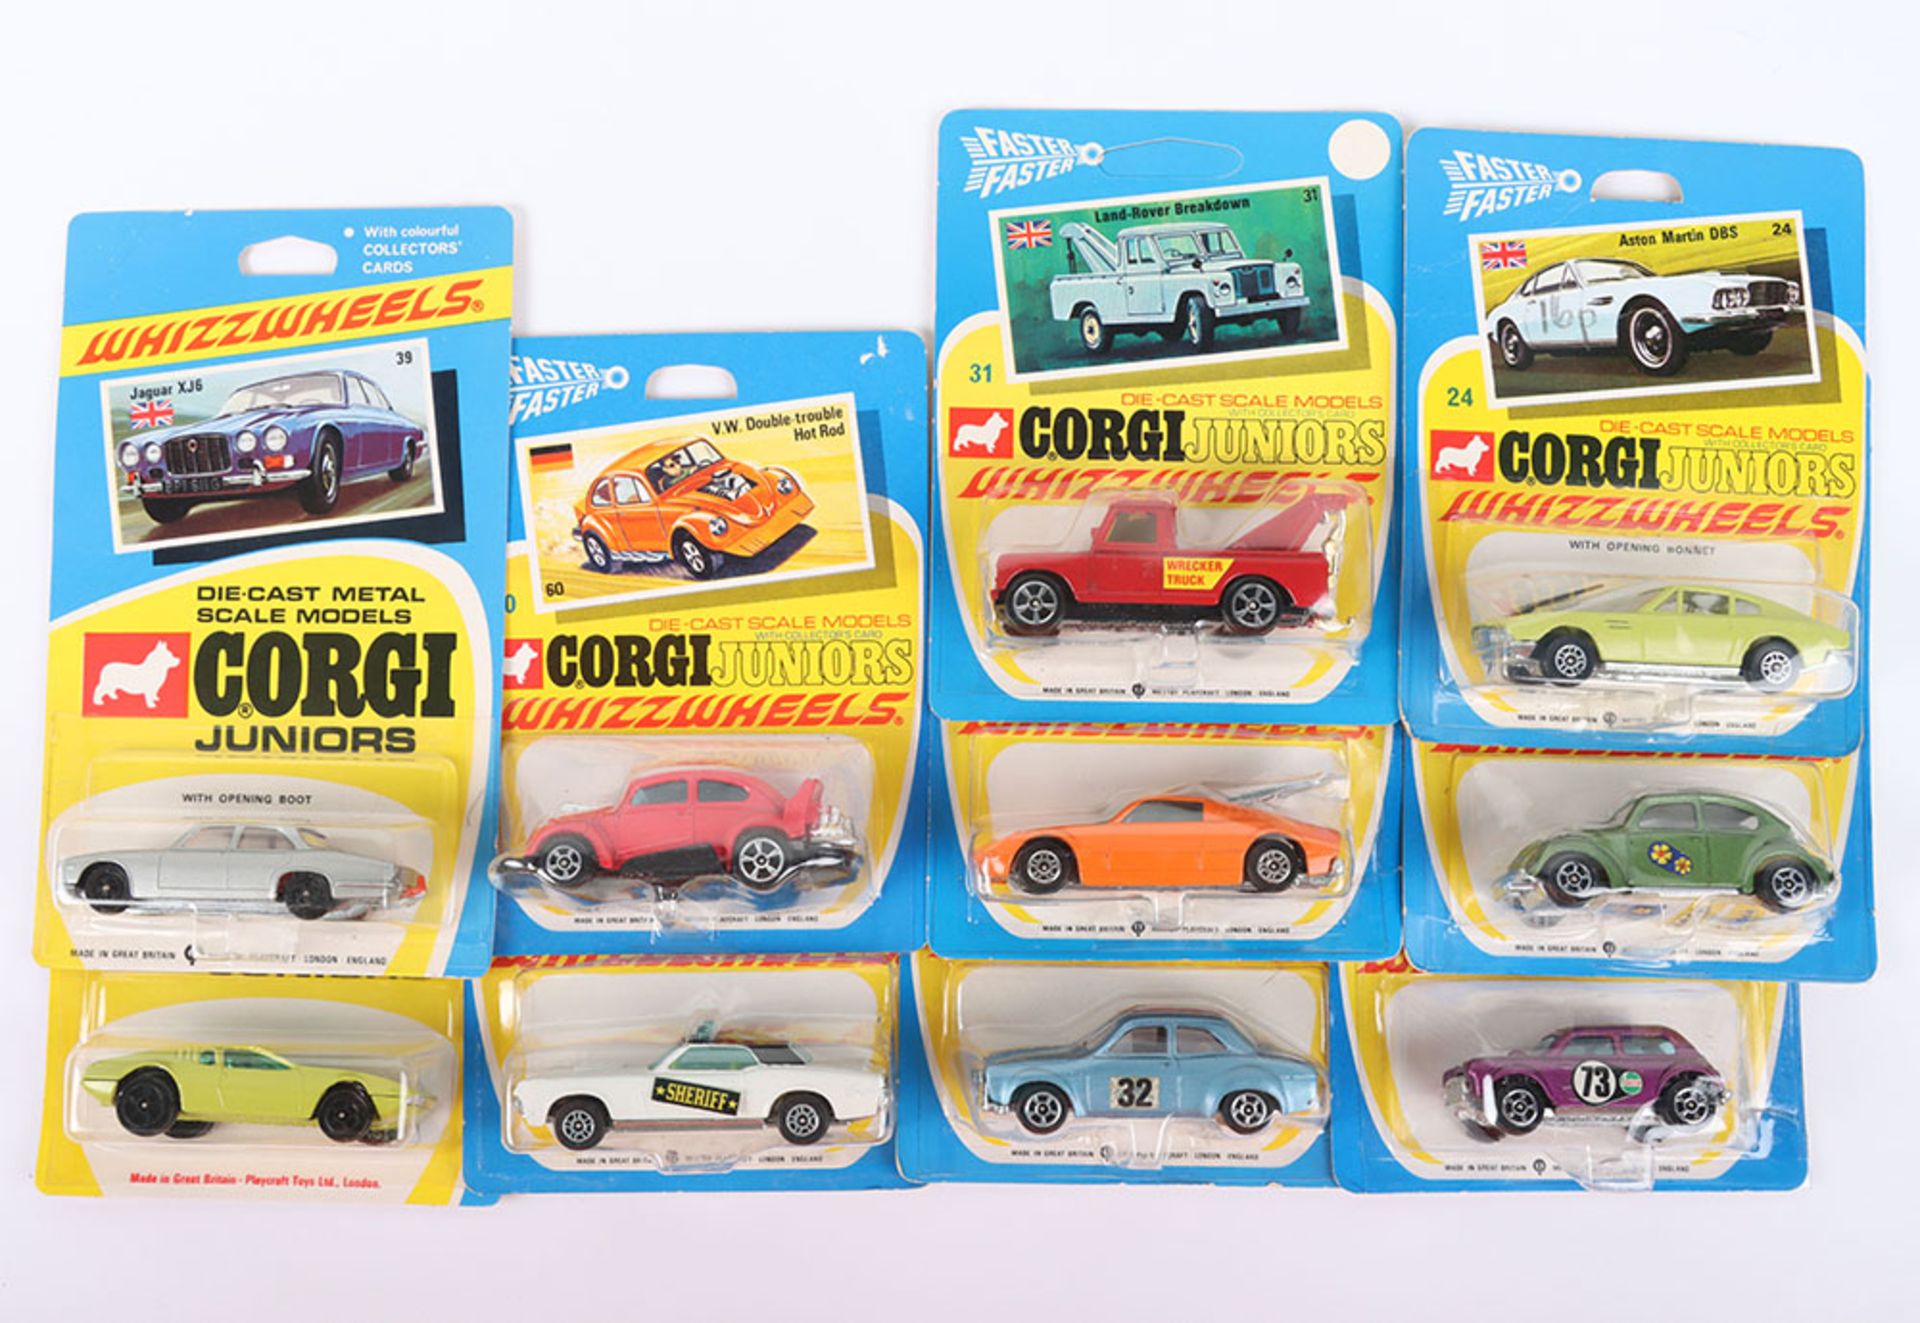 Ten Carded Corgi Junior Models with collectors cards